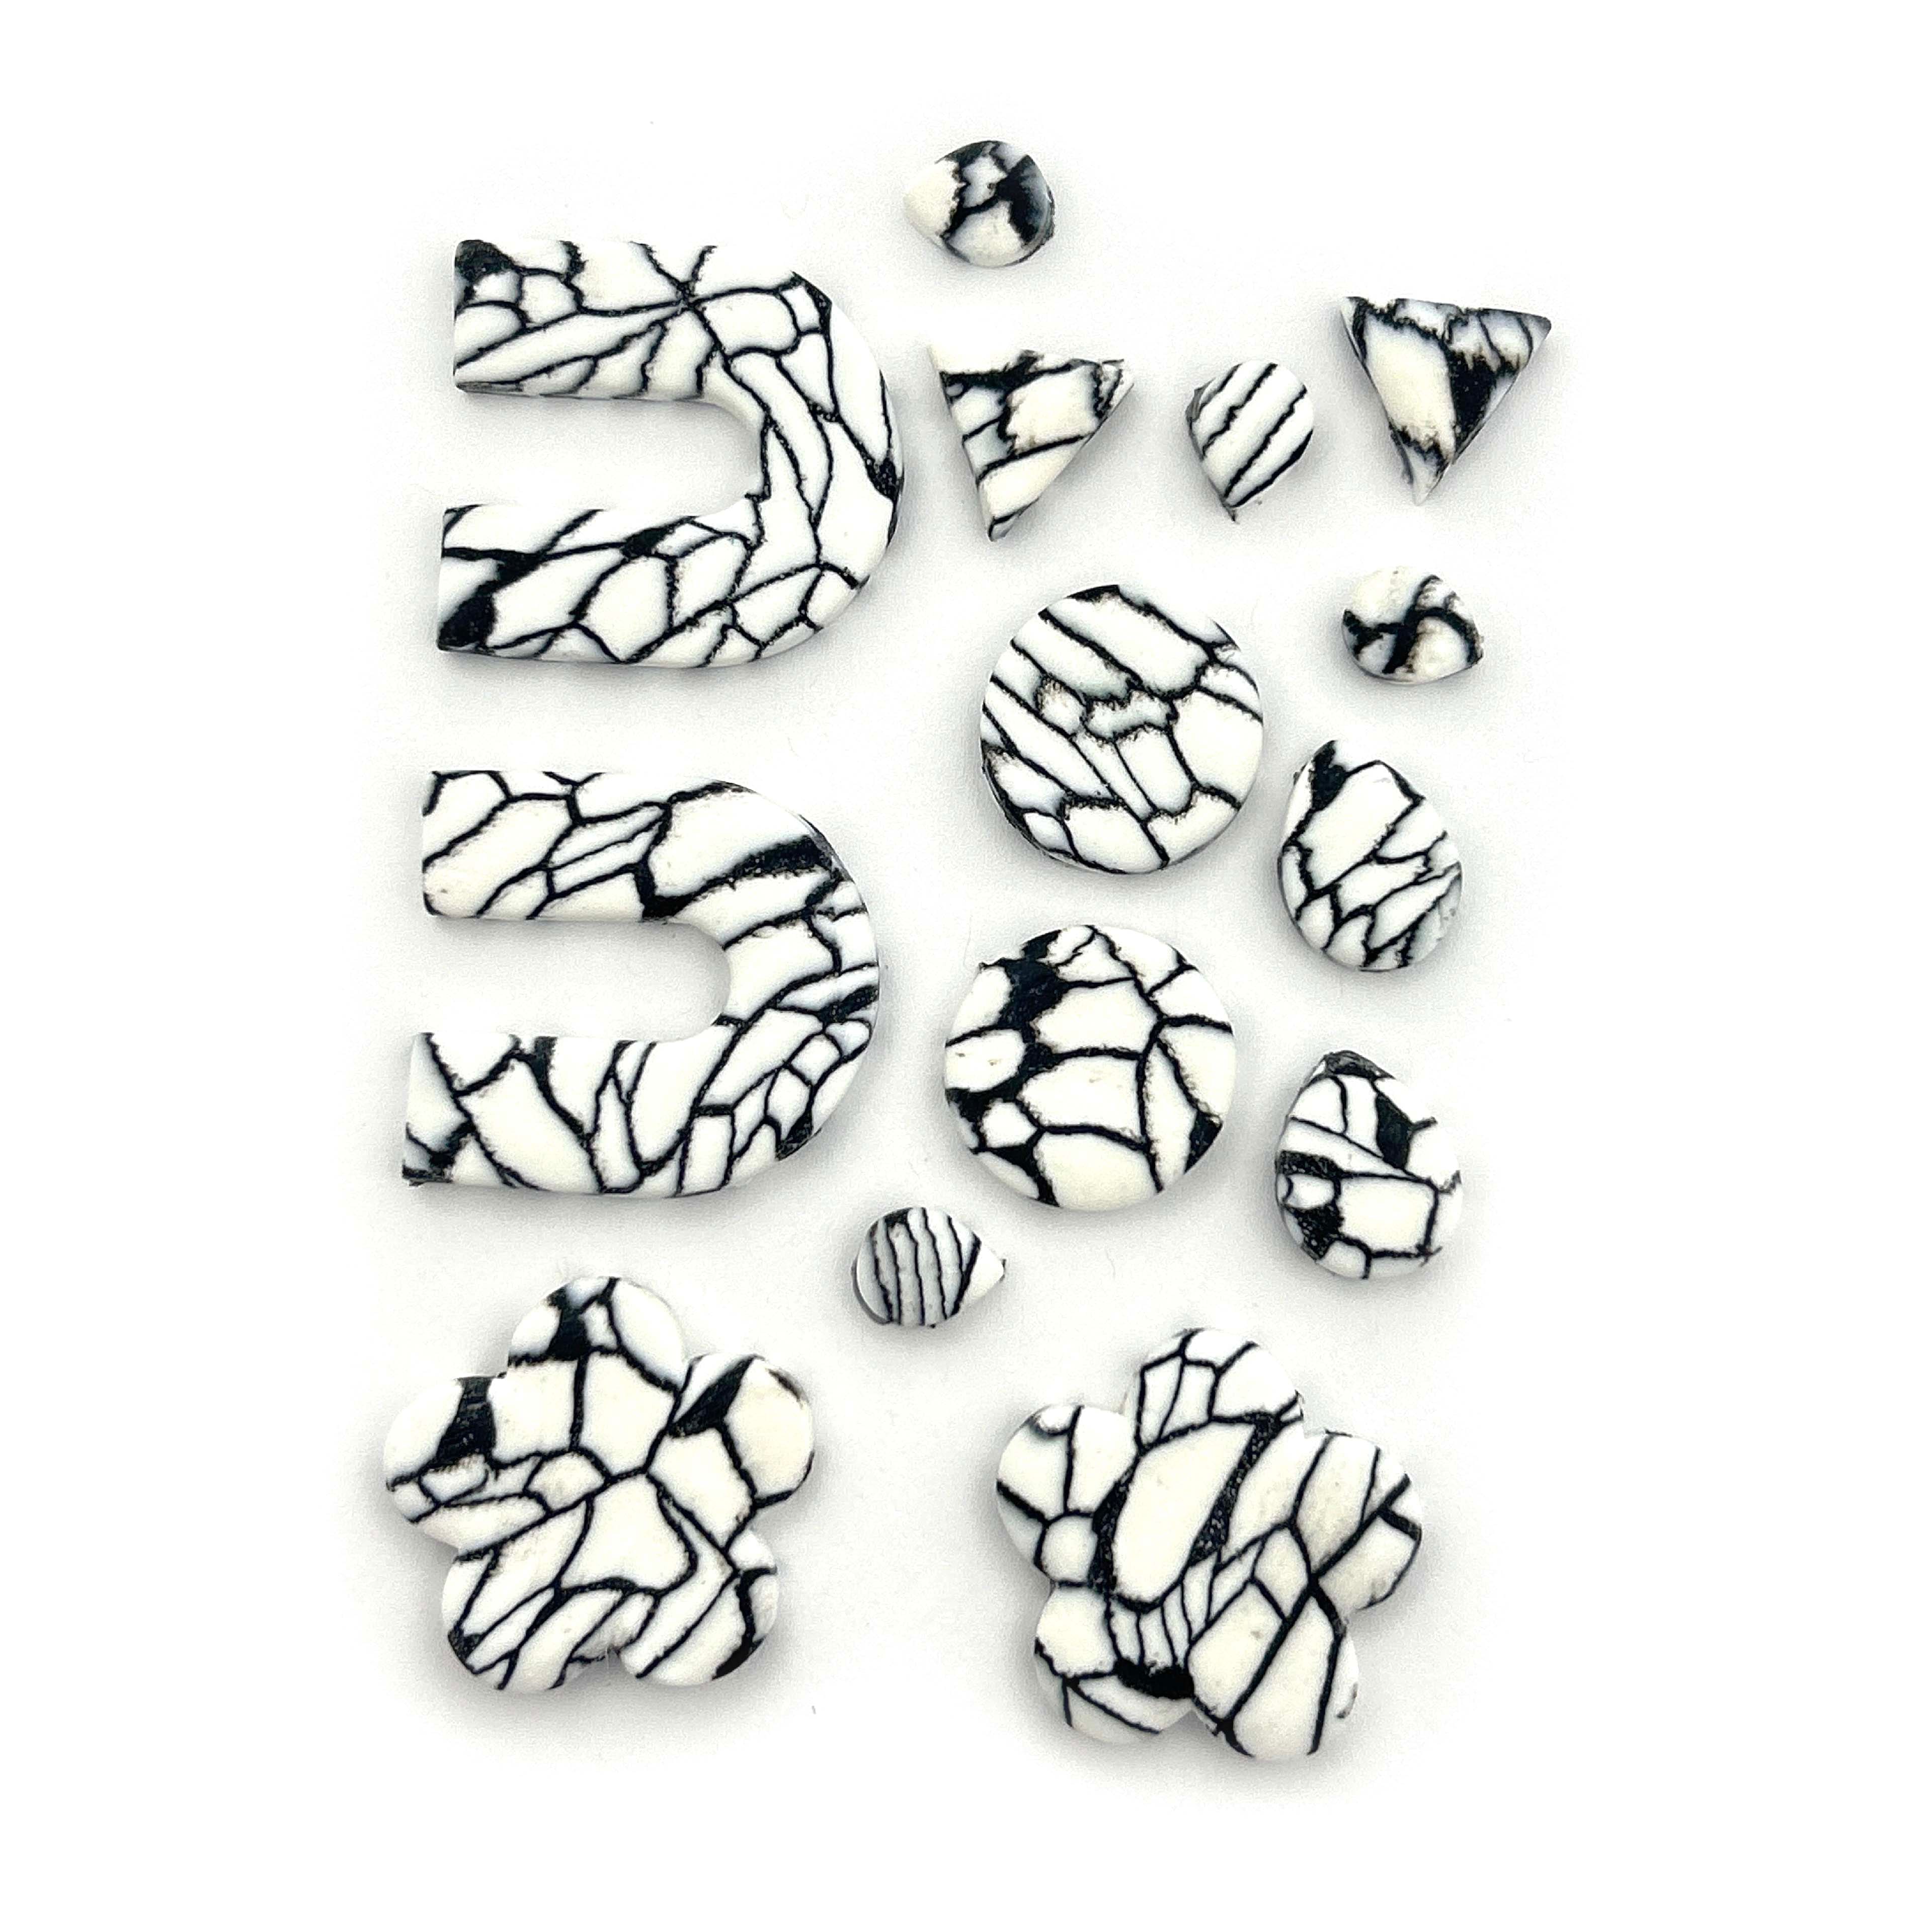 Black & White Clay Beads — Parkers Inc.